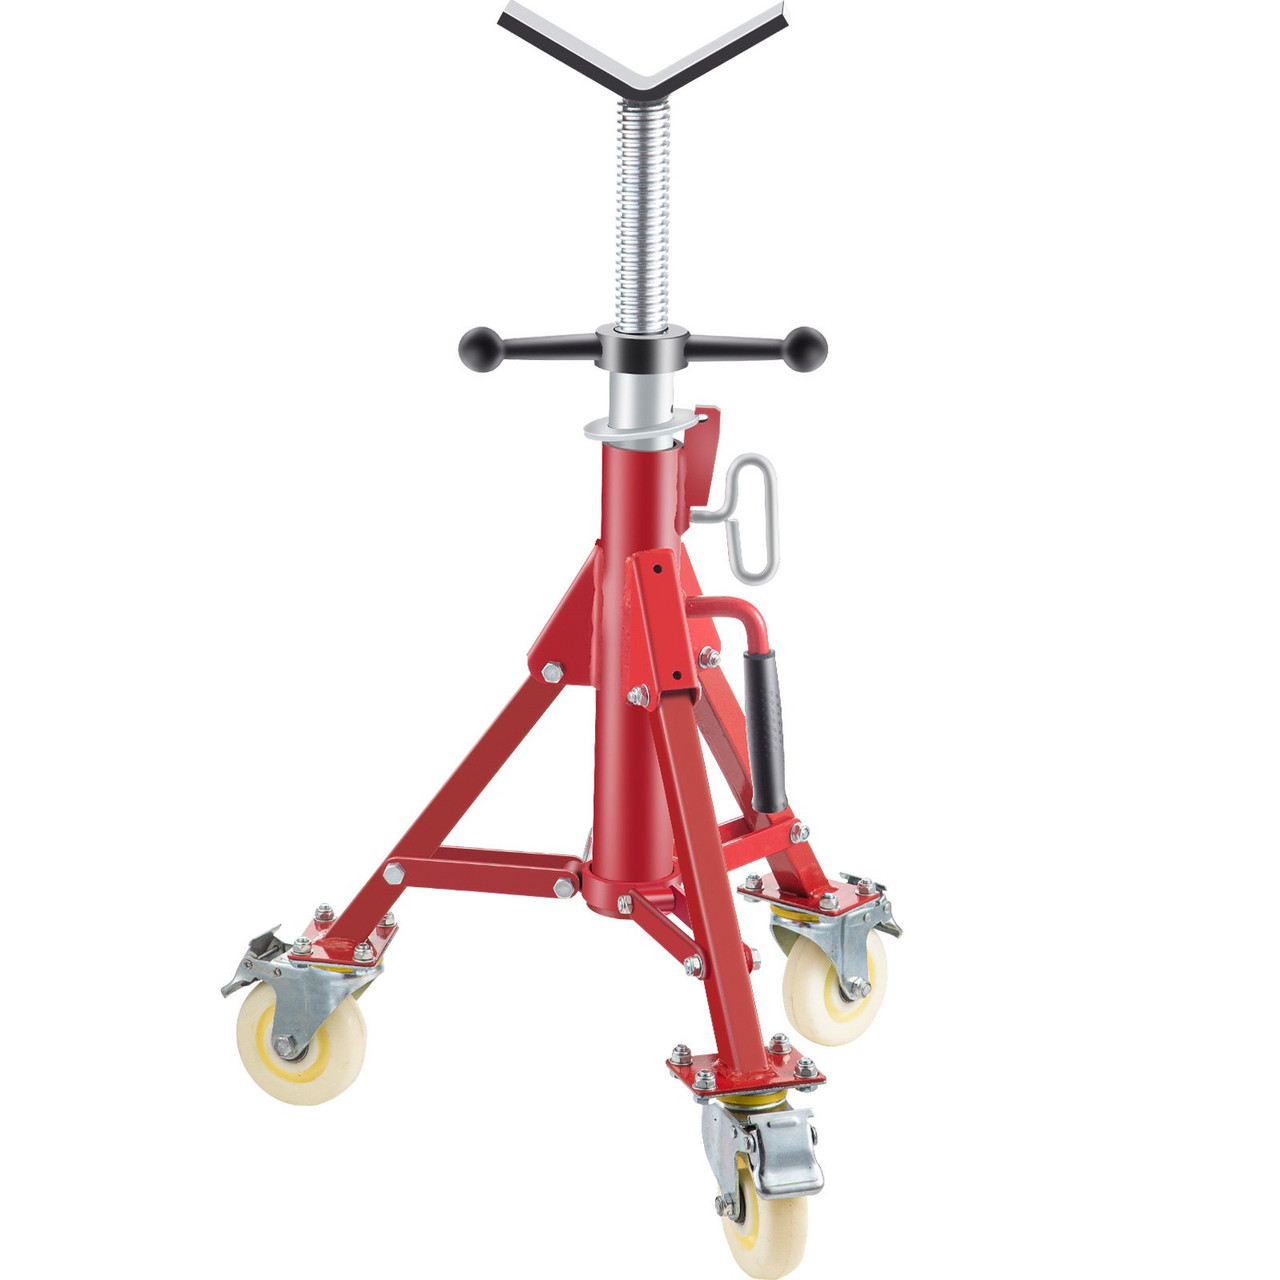 Pipe Stand, Pipe Jack Stand, V Head Pipe Stand Adjustable Height 23.6-42.5 Inch, Pipe Jack Stands with Casters 882 LB, Folding Portable Pipe Stands 1/8-12 Inch Pipe Supporting, Steel Jack Stand